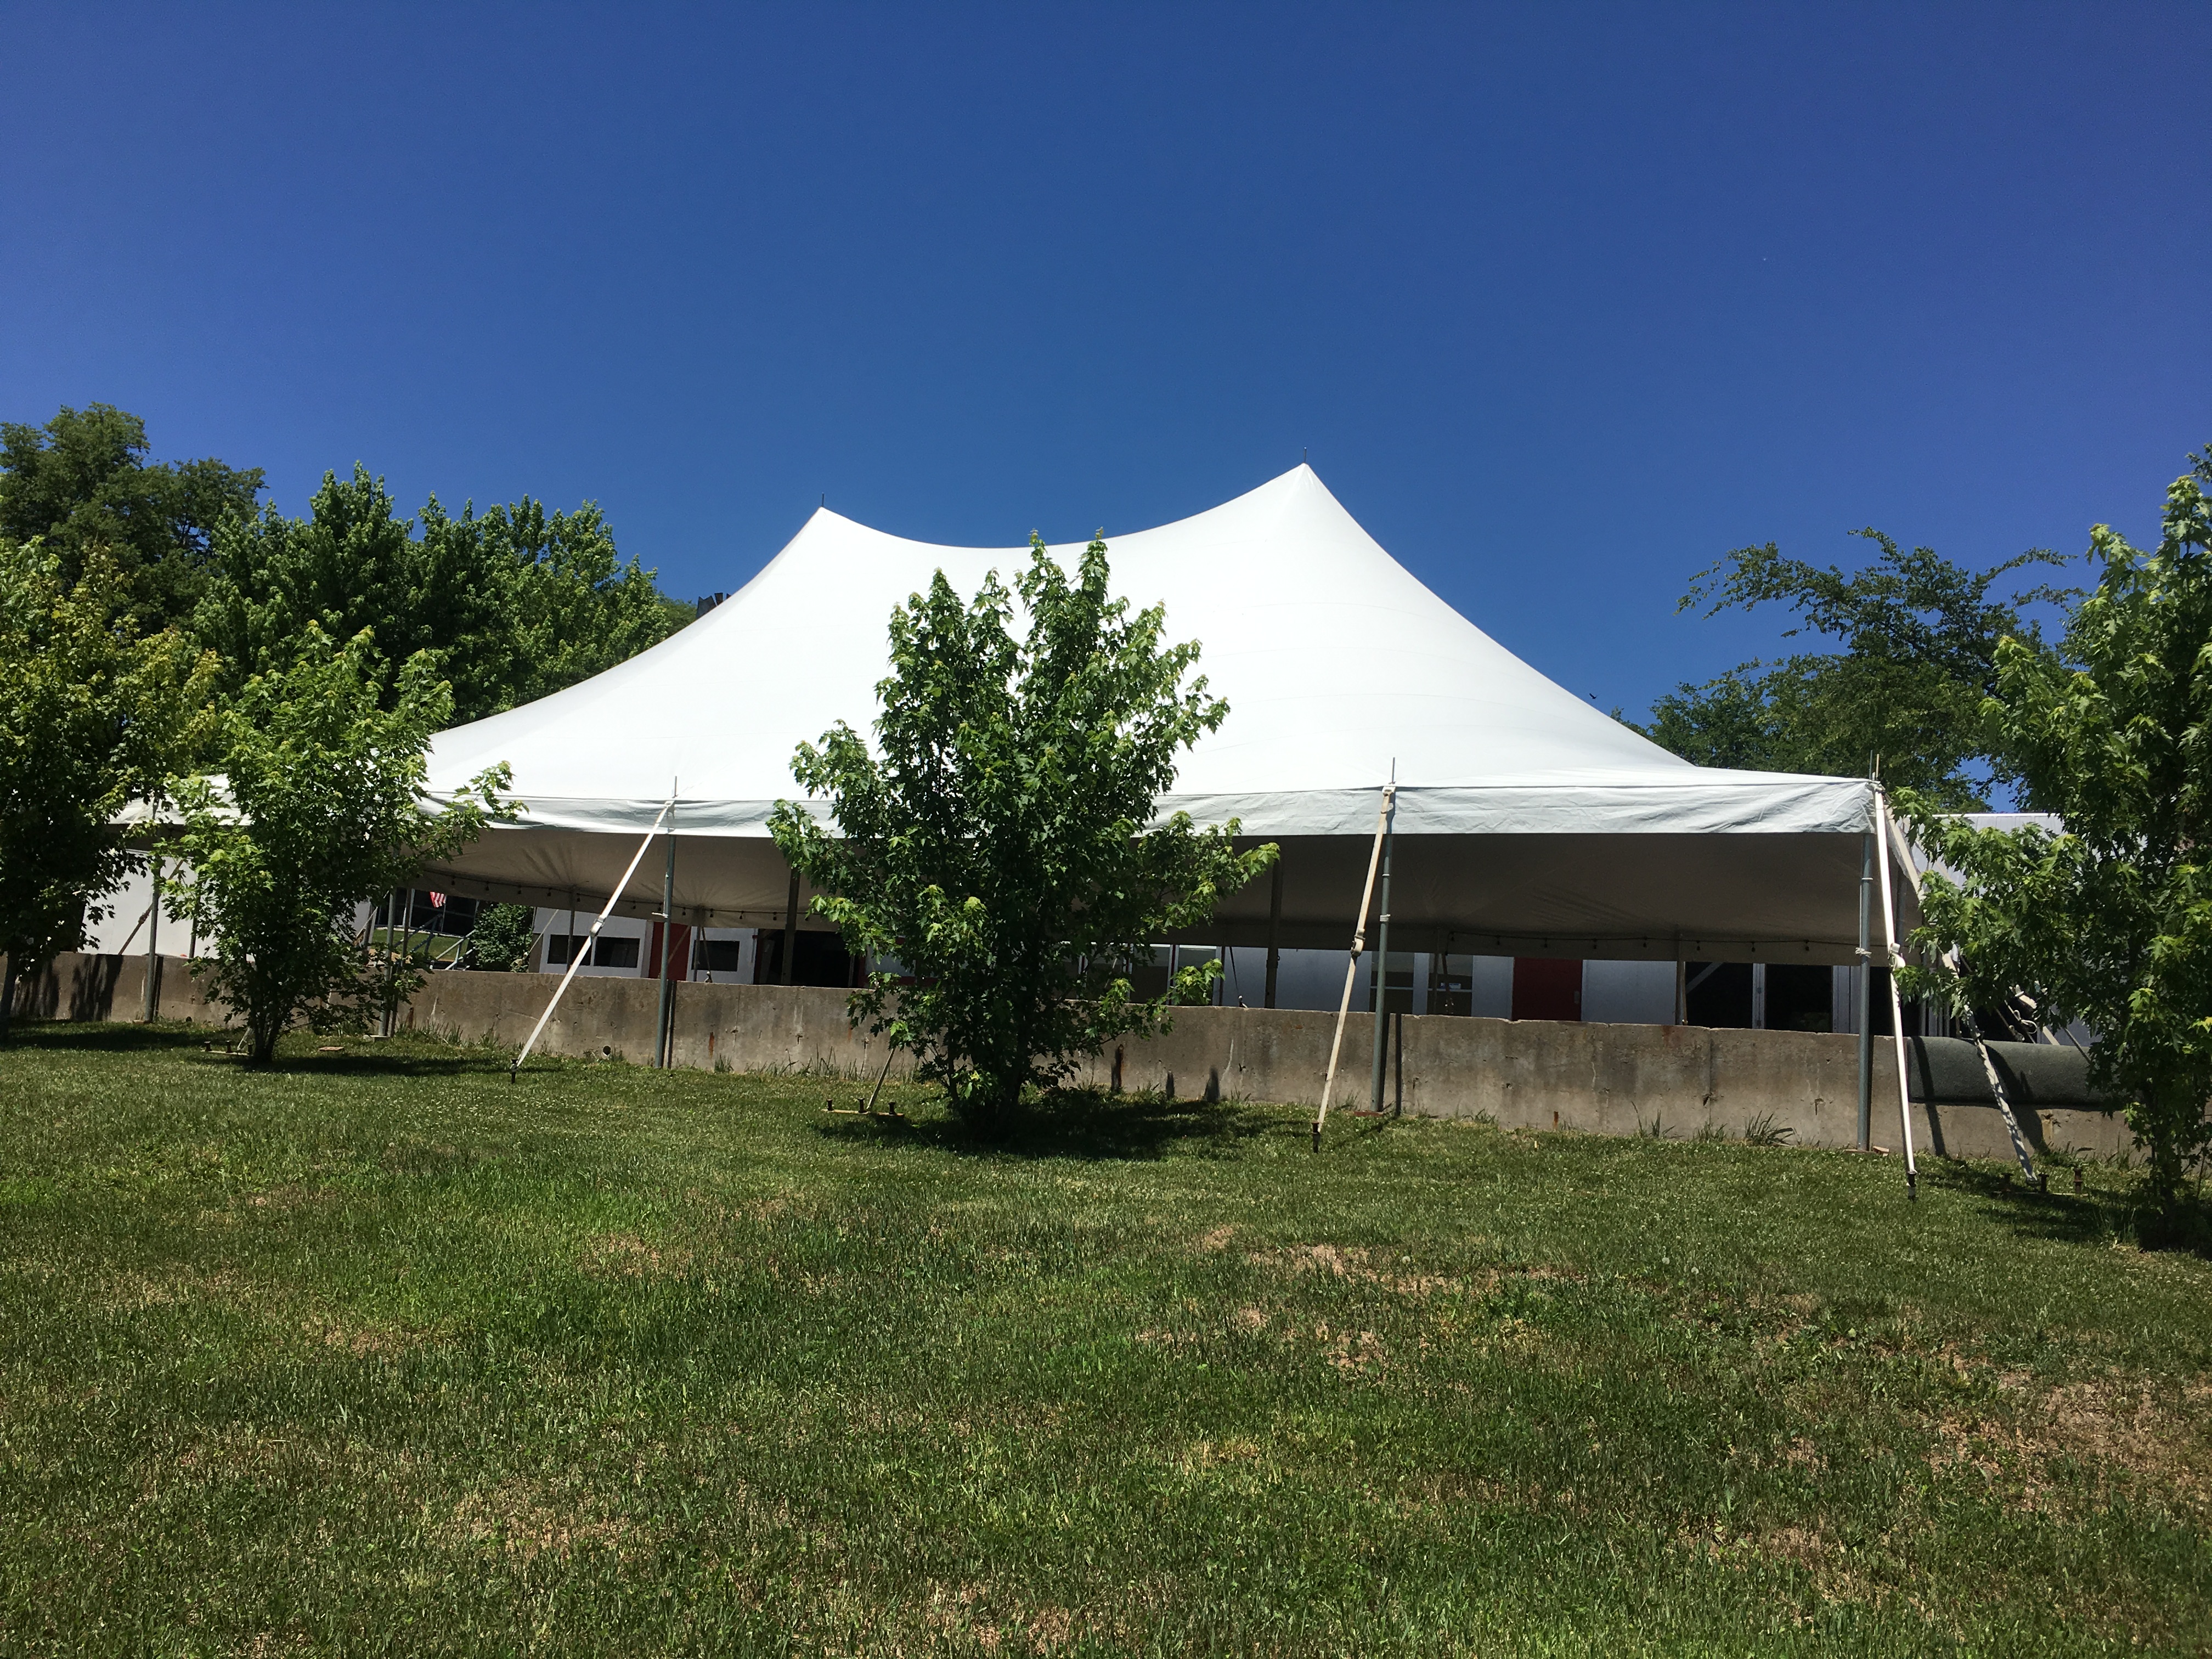 40'x60' Rope and Pole Tent with concrete wall obstruction at an outdoor wedding reception in Columbus Junction, IA